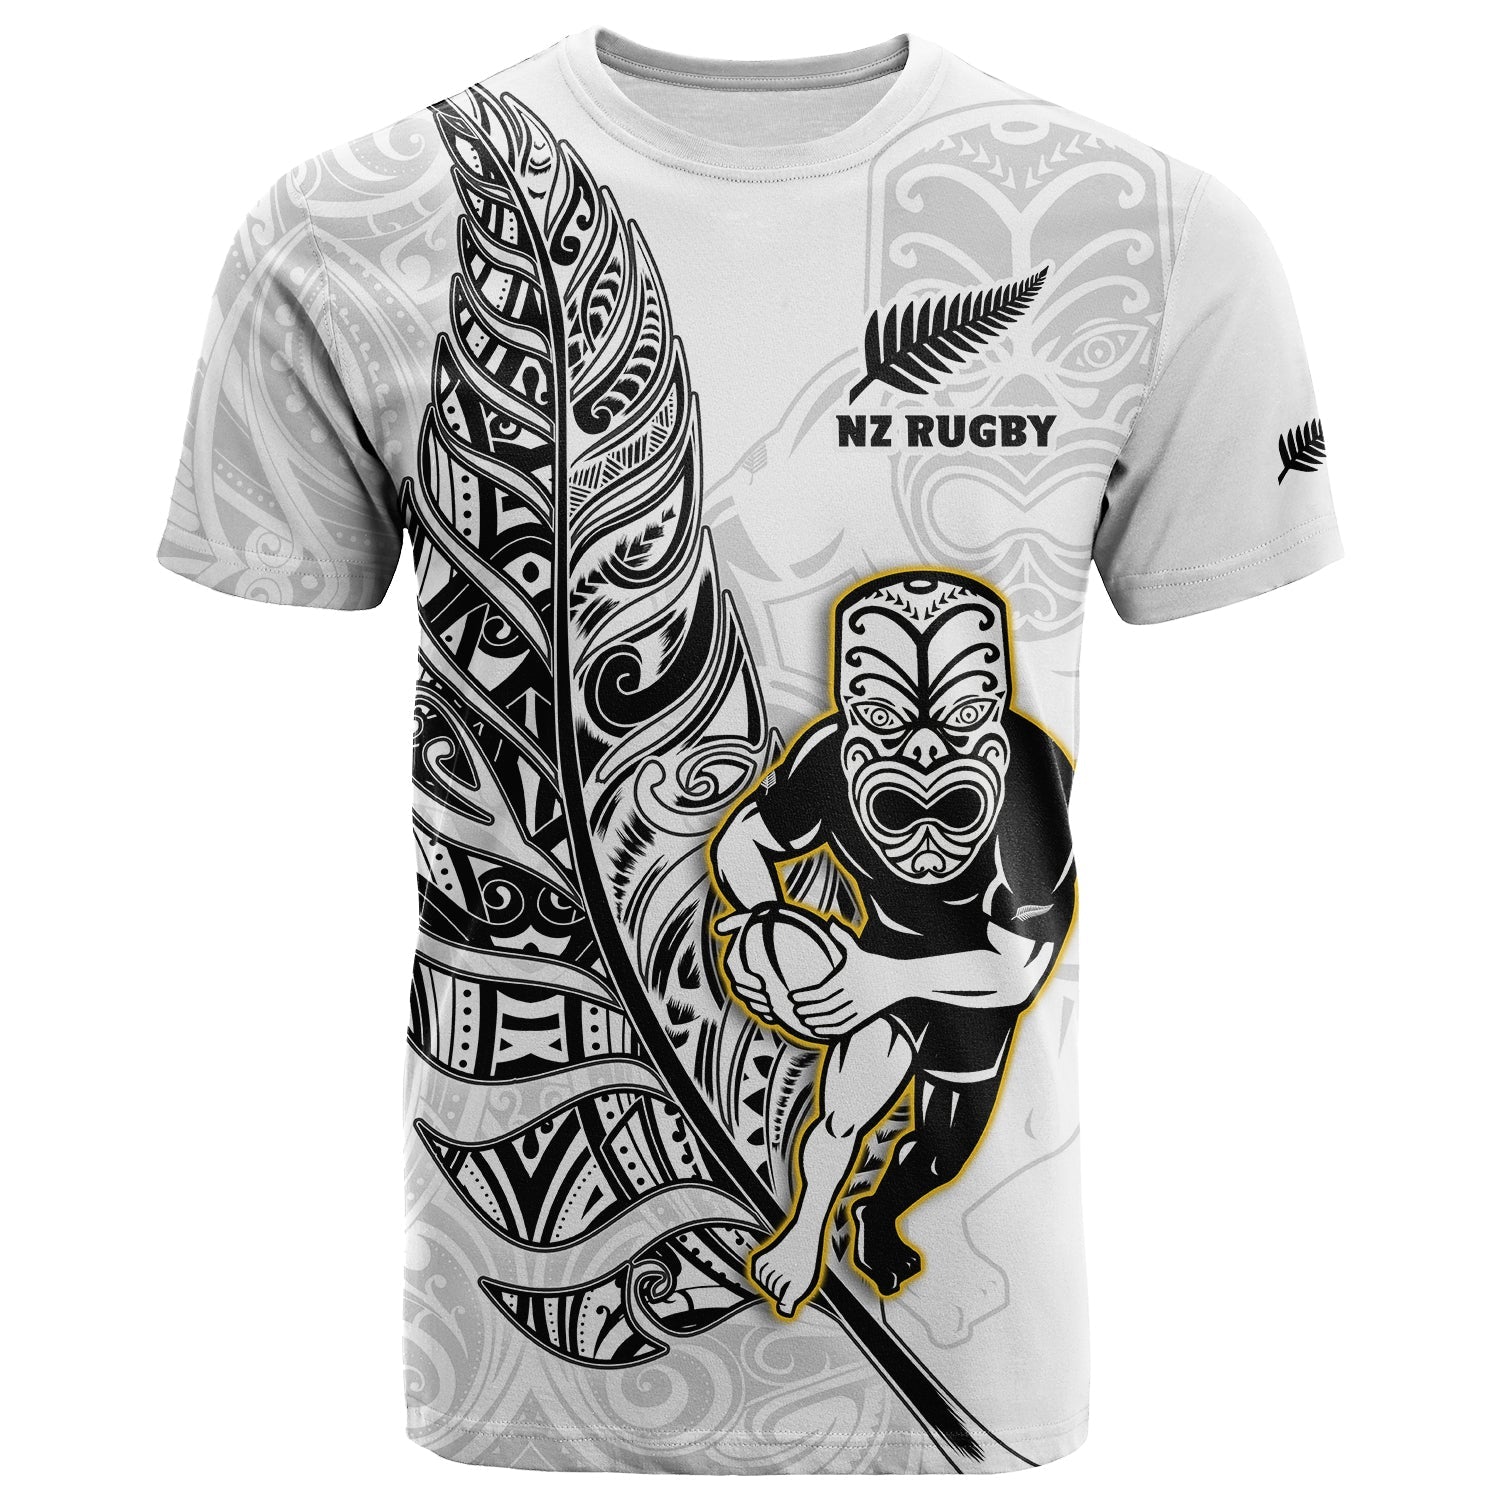 (Custom Text and Number) New Zealand Silver Fern Rugby T Shirt All Black Maori Version White LT14 White - Polynesian Pride